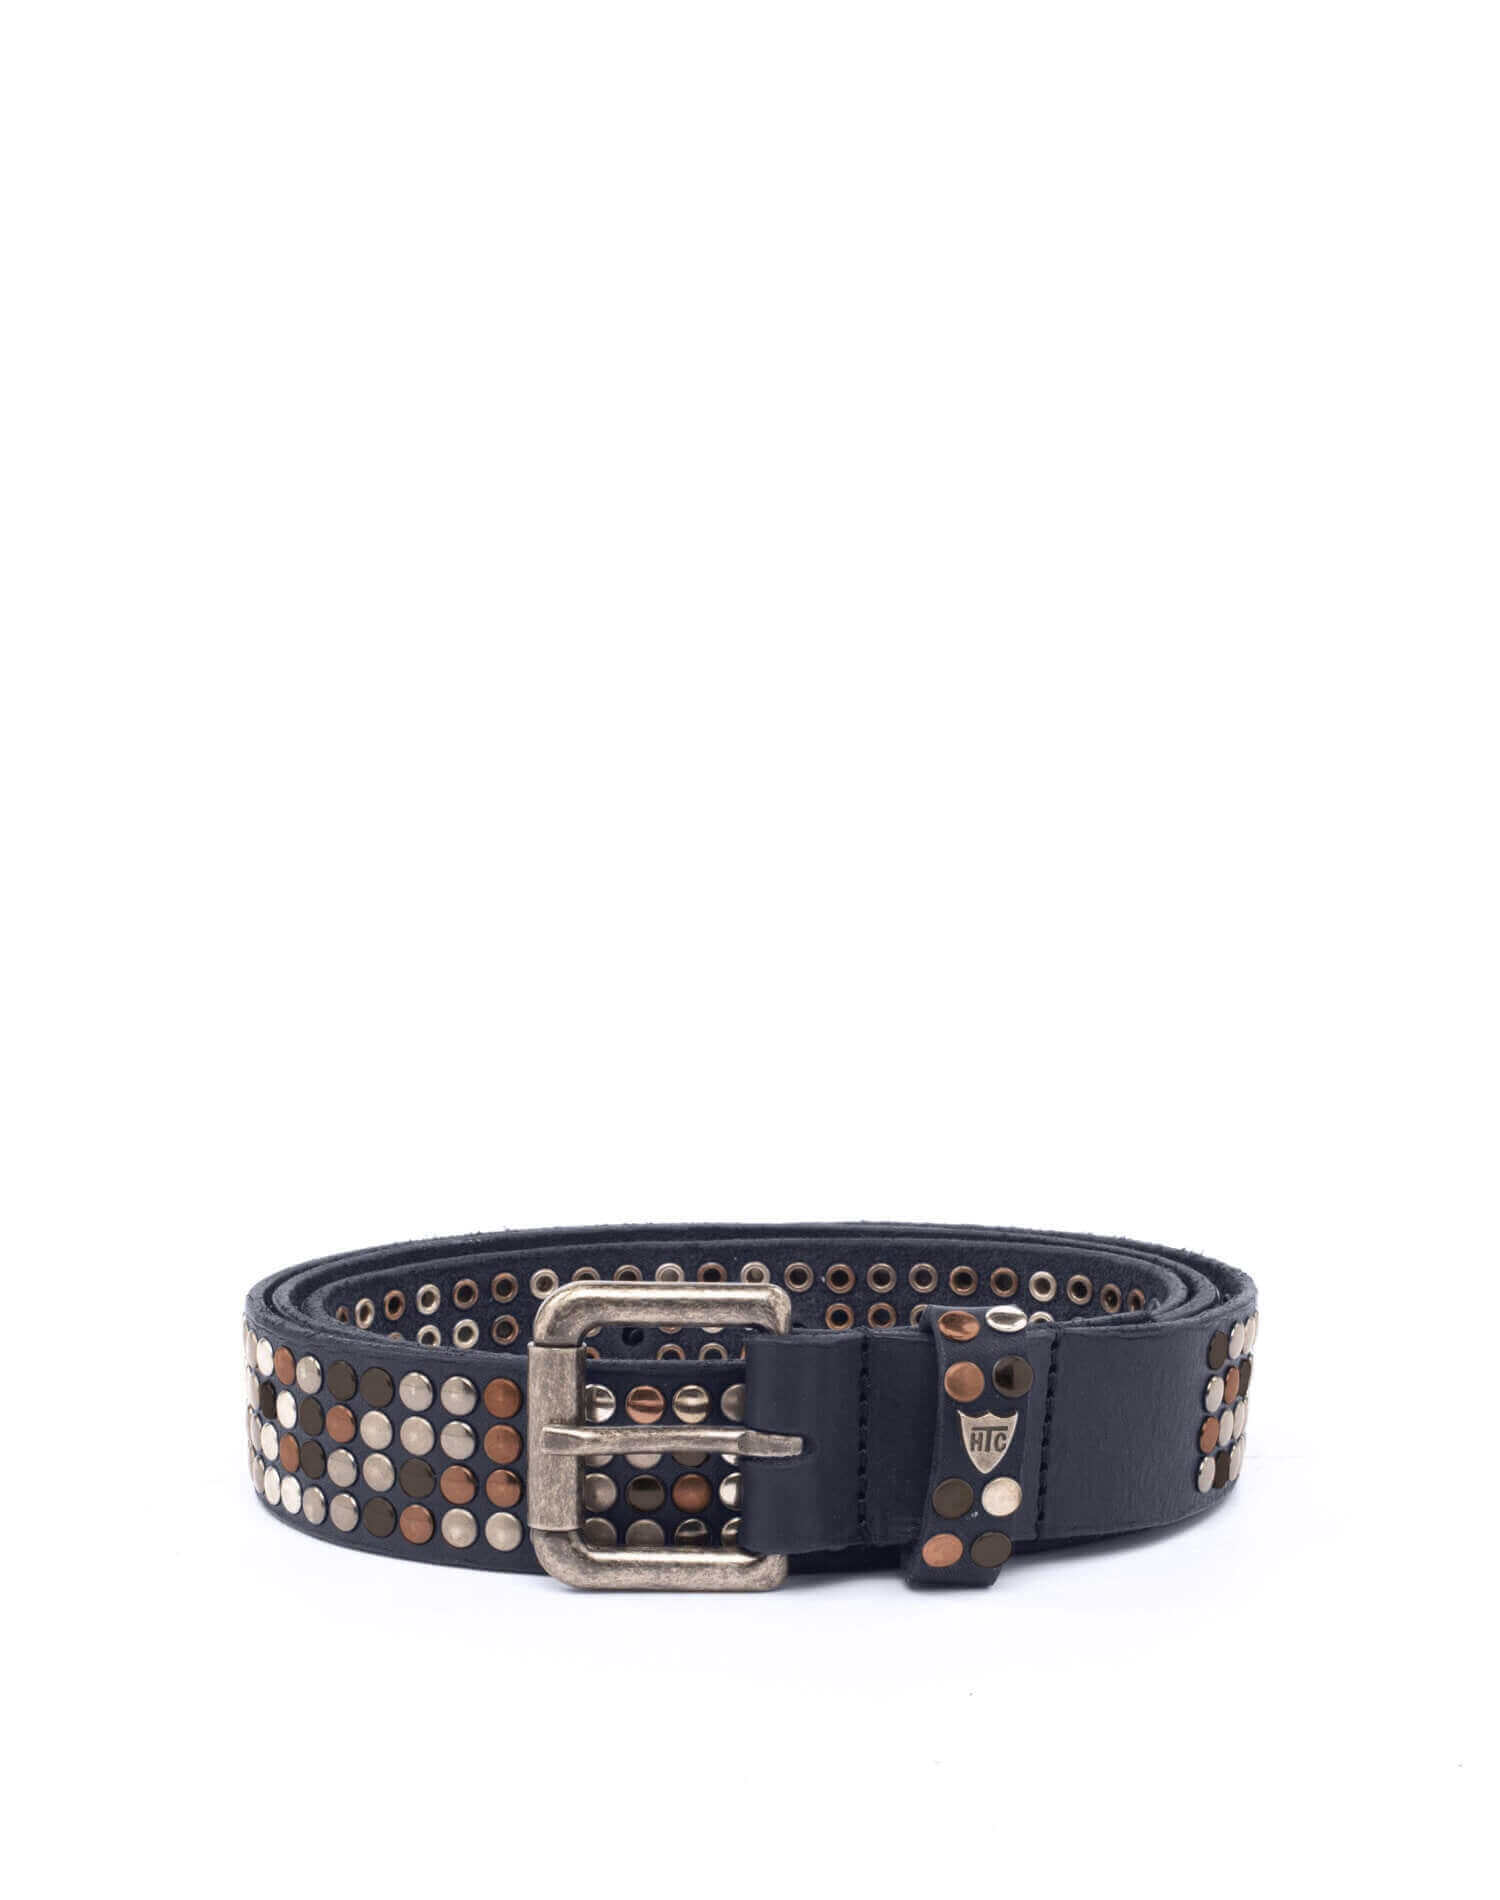 4.000 STUDS COLOR BELT Blue leather belt with studs, brass buckle, studded zamac belt loop and rivet with HTC logo. Height: 3 cm. Made in Italy. HTC LOS ANGELES